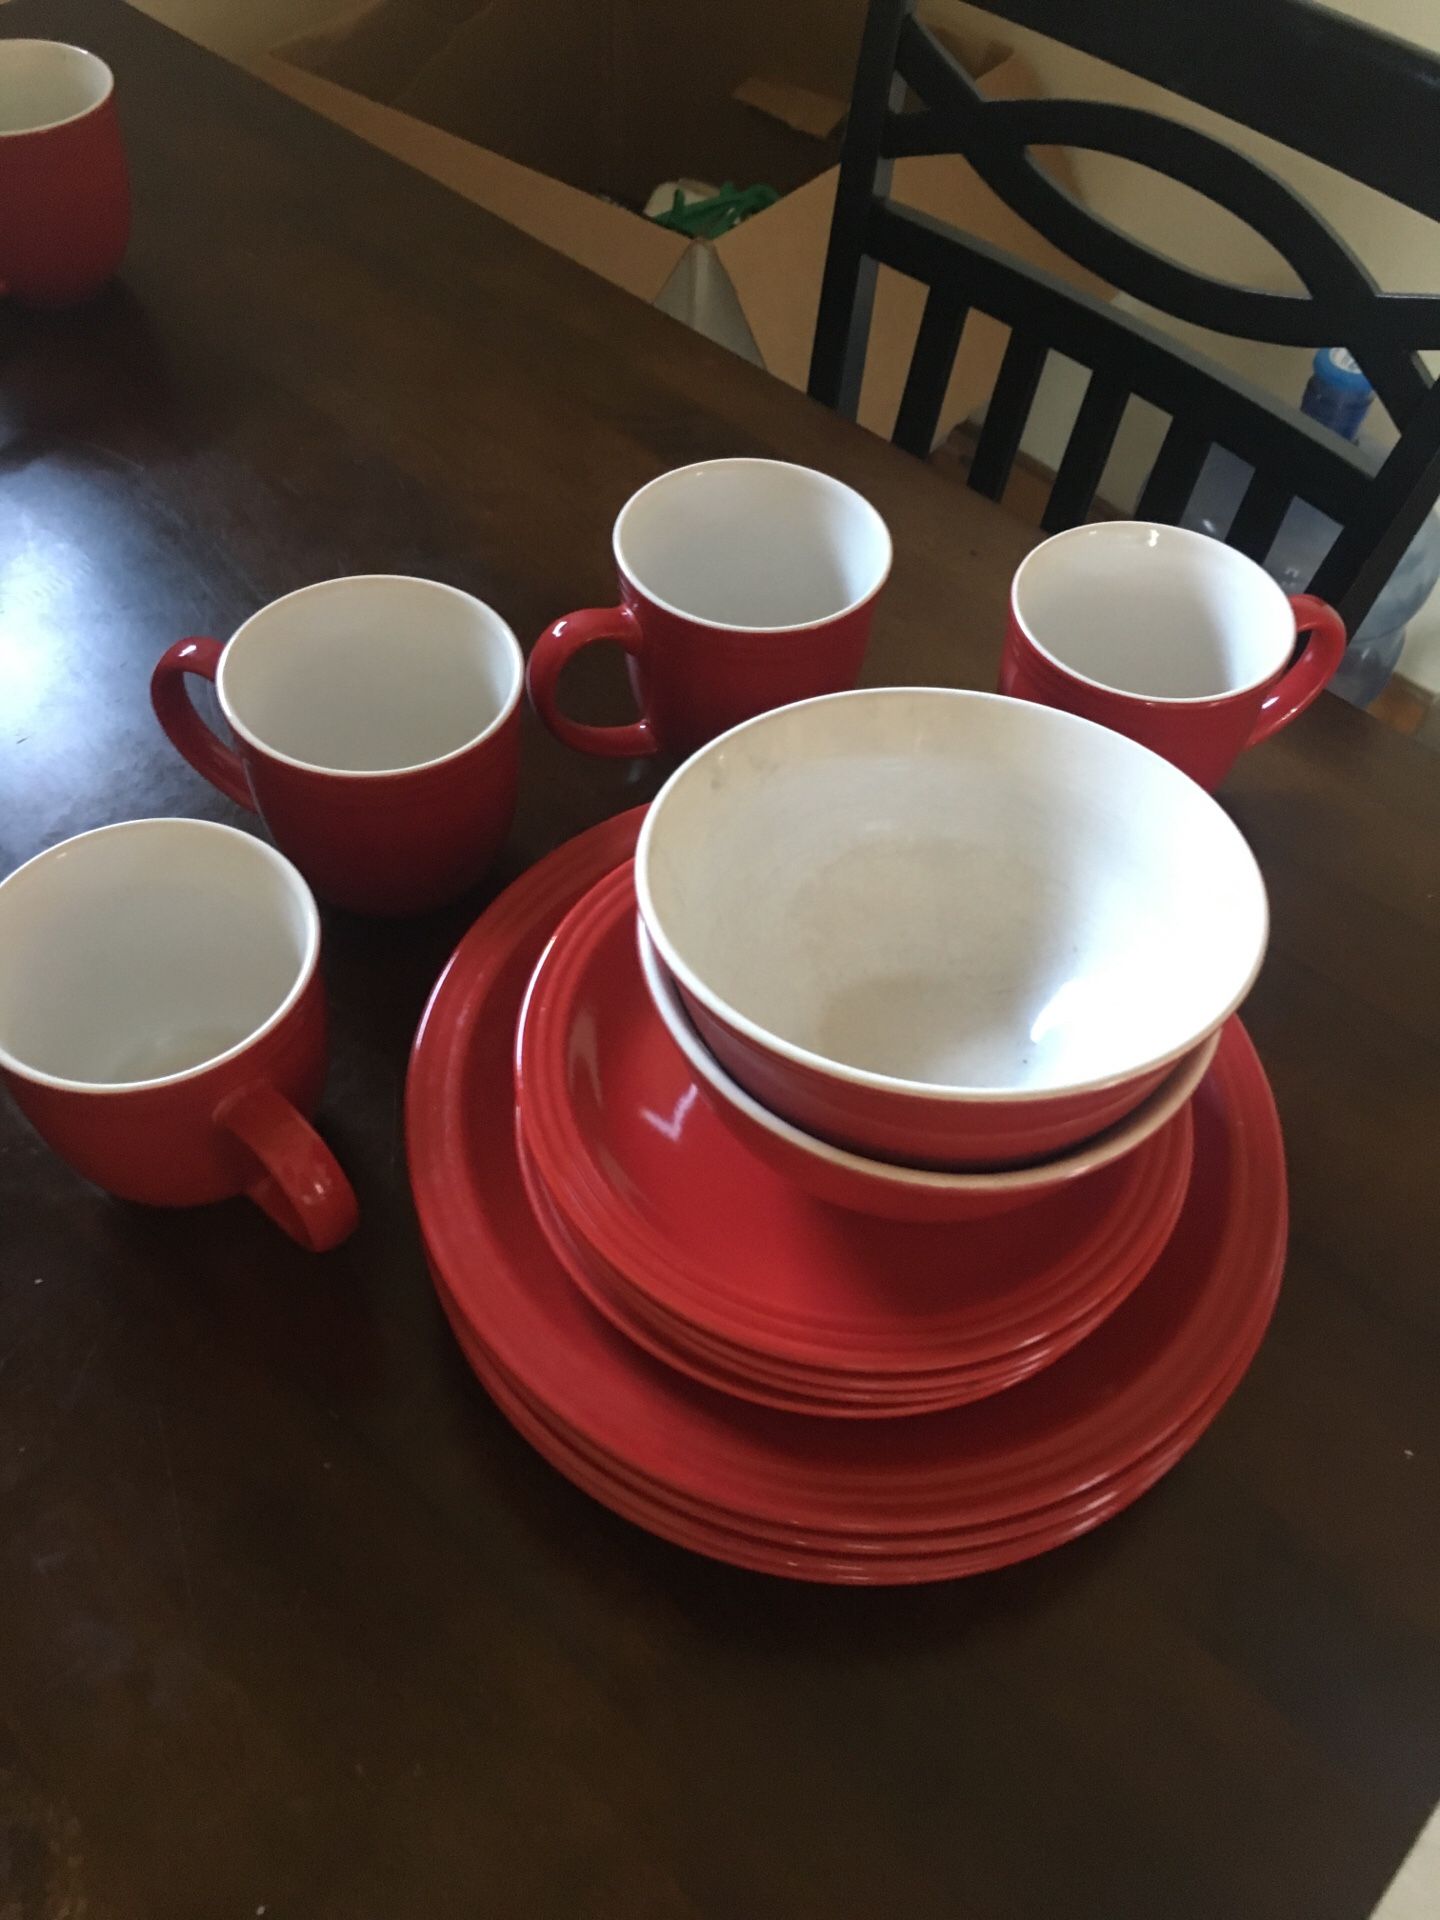 Matching cups, bowls, plates & smaller plates!!!